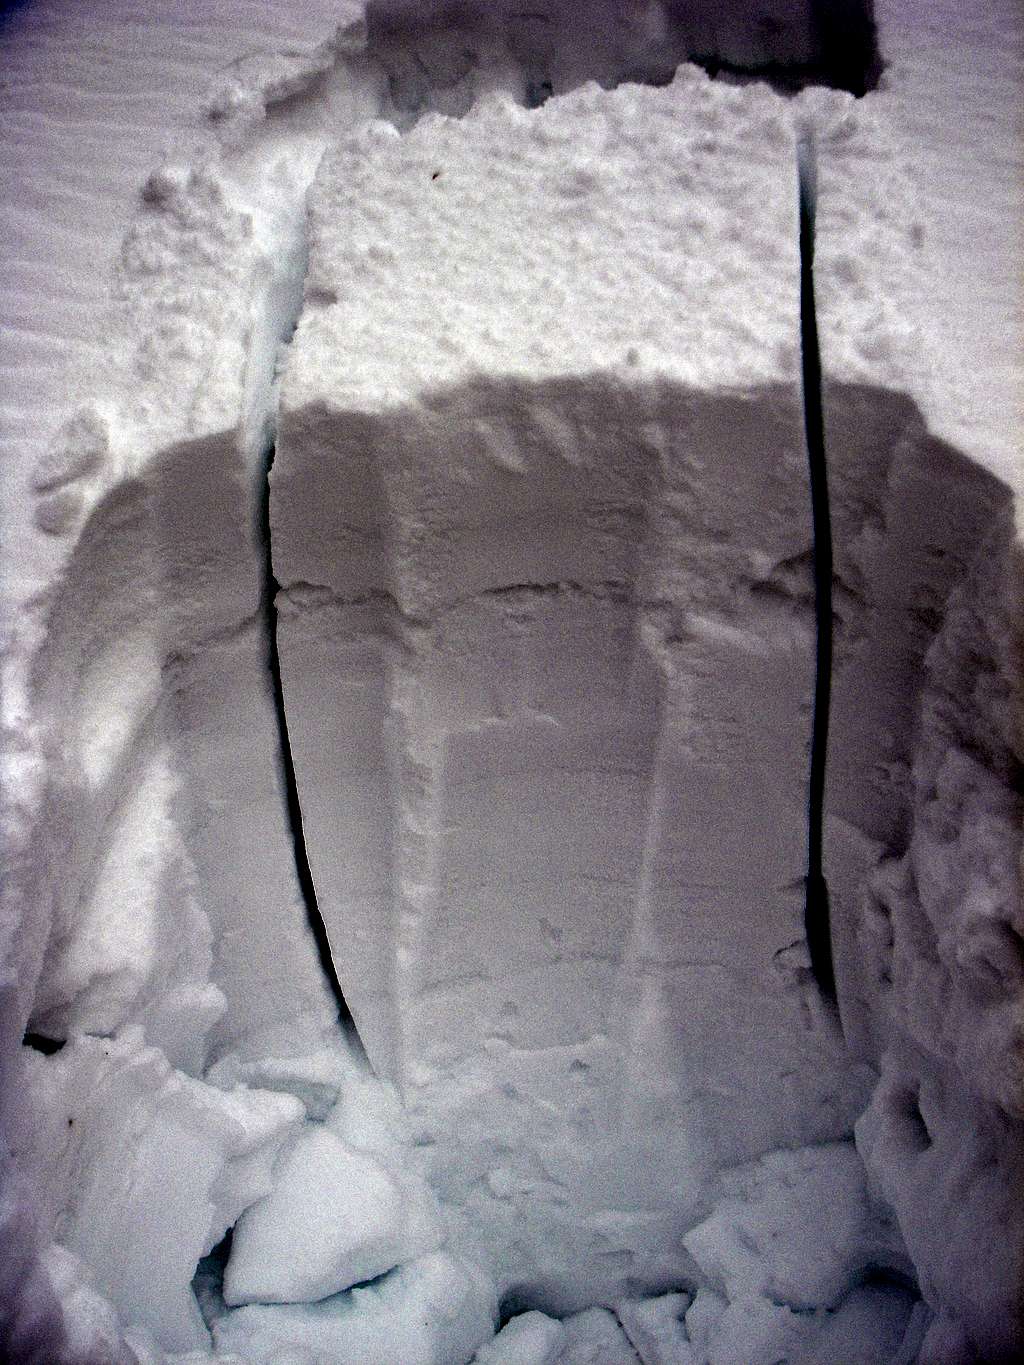 A snowpit on the Meadow Chutes